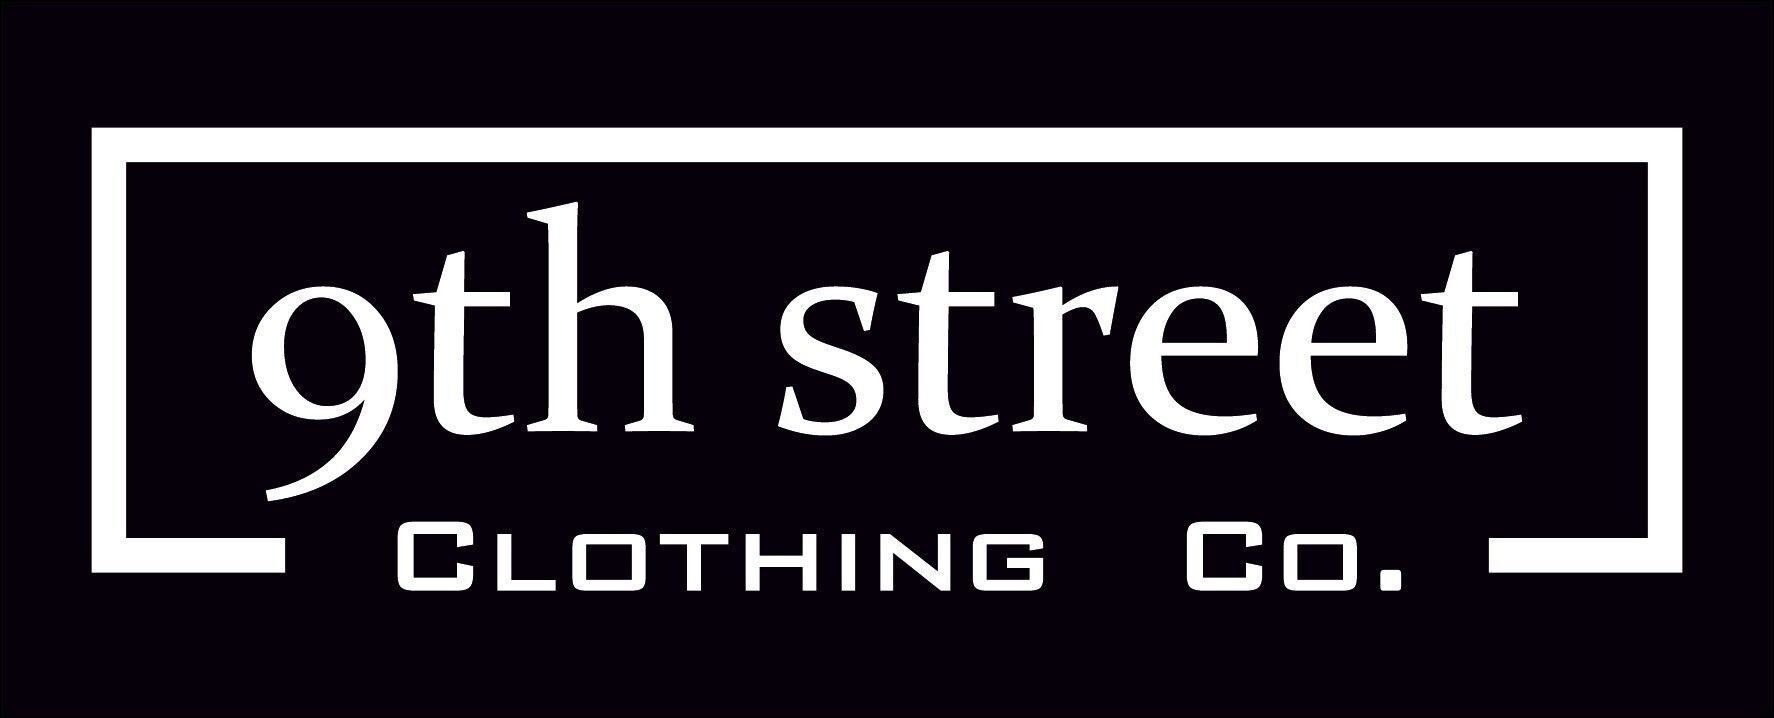 9th street Clothing Co.